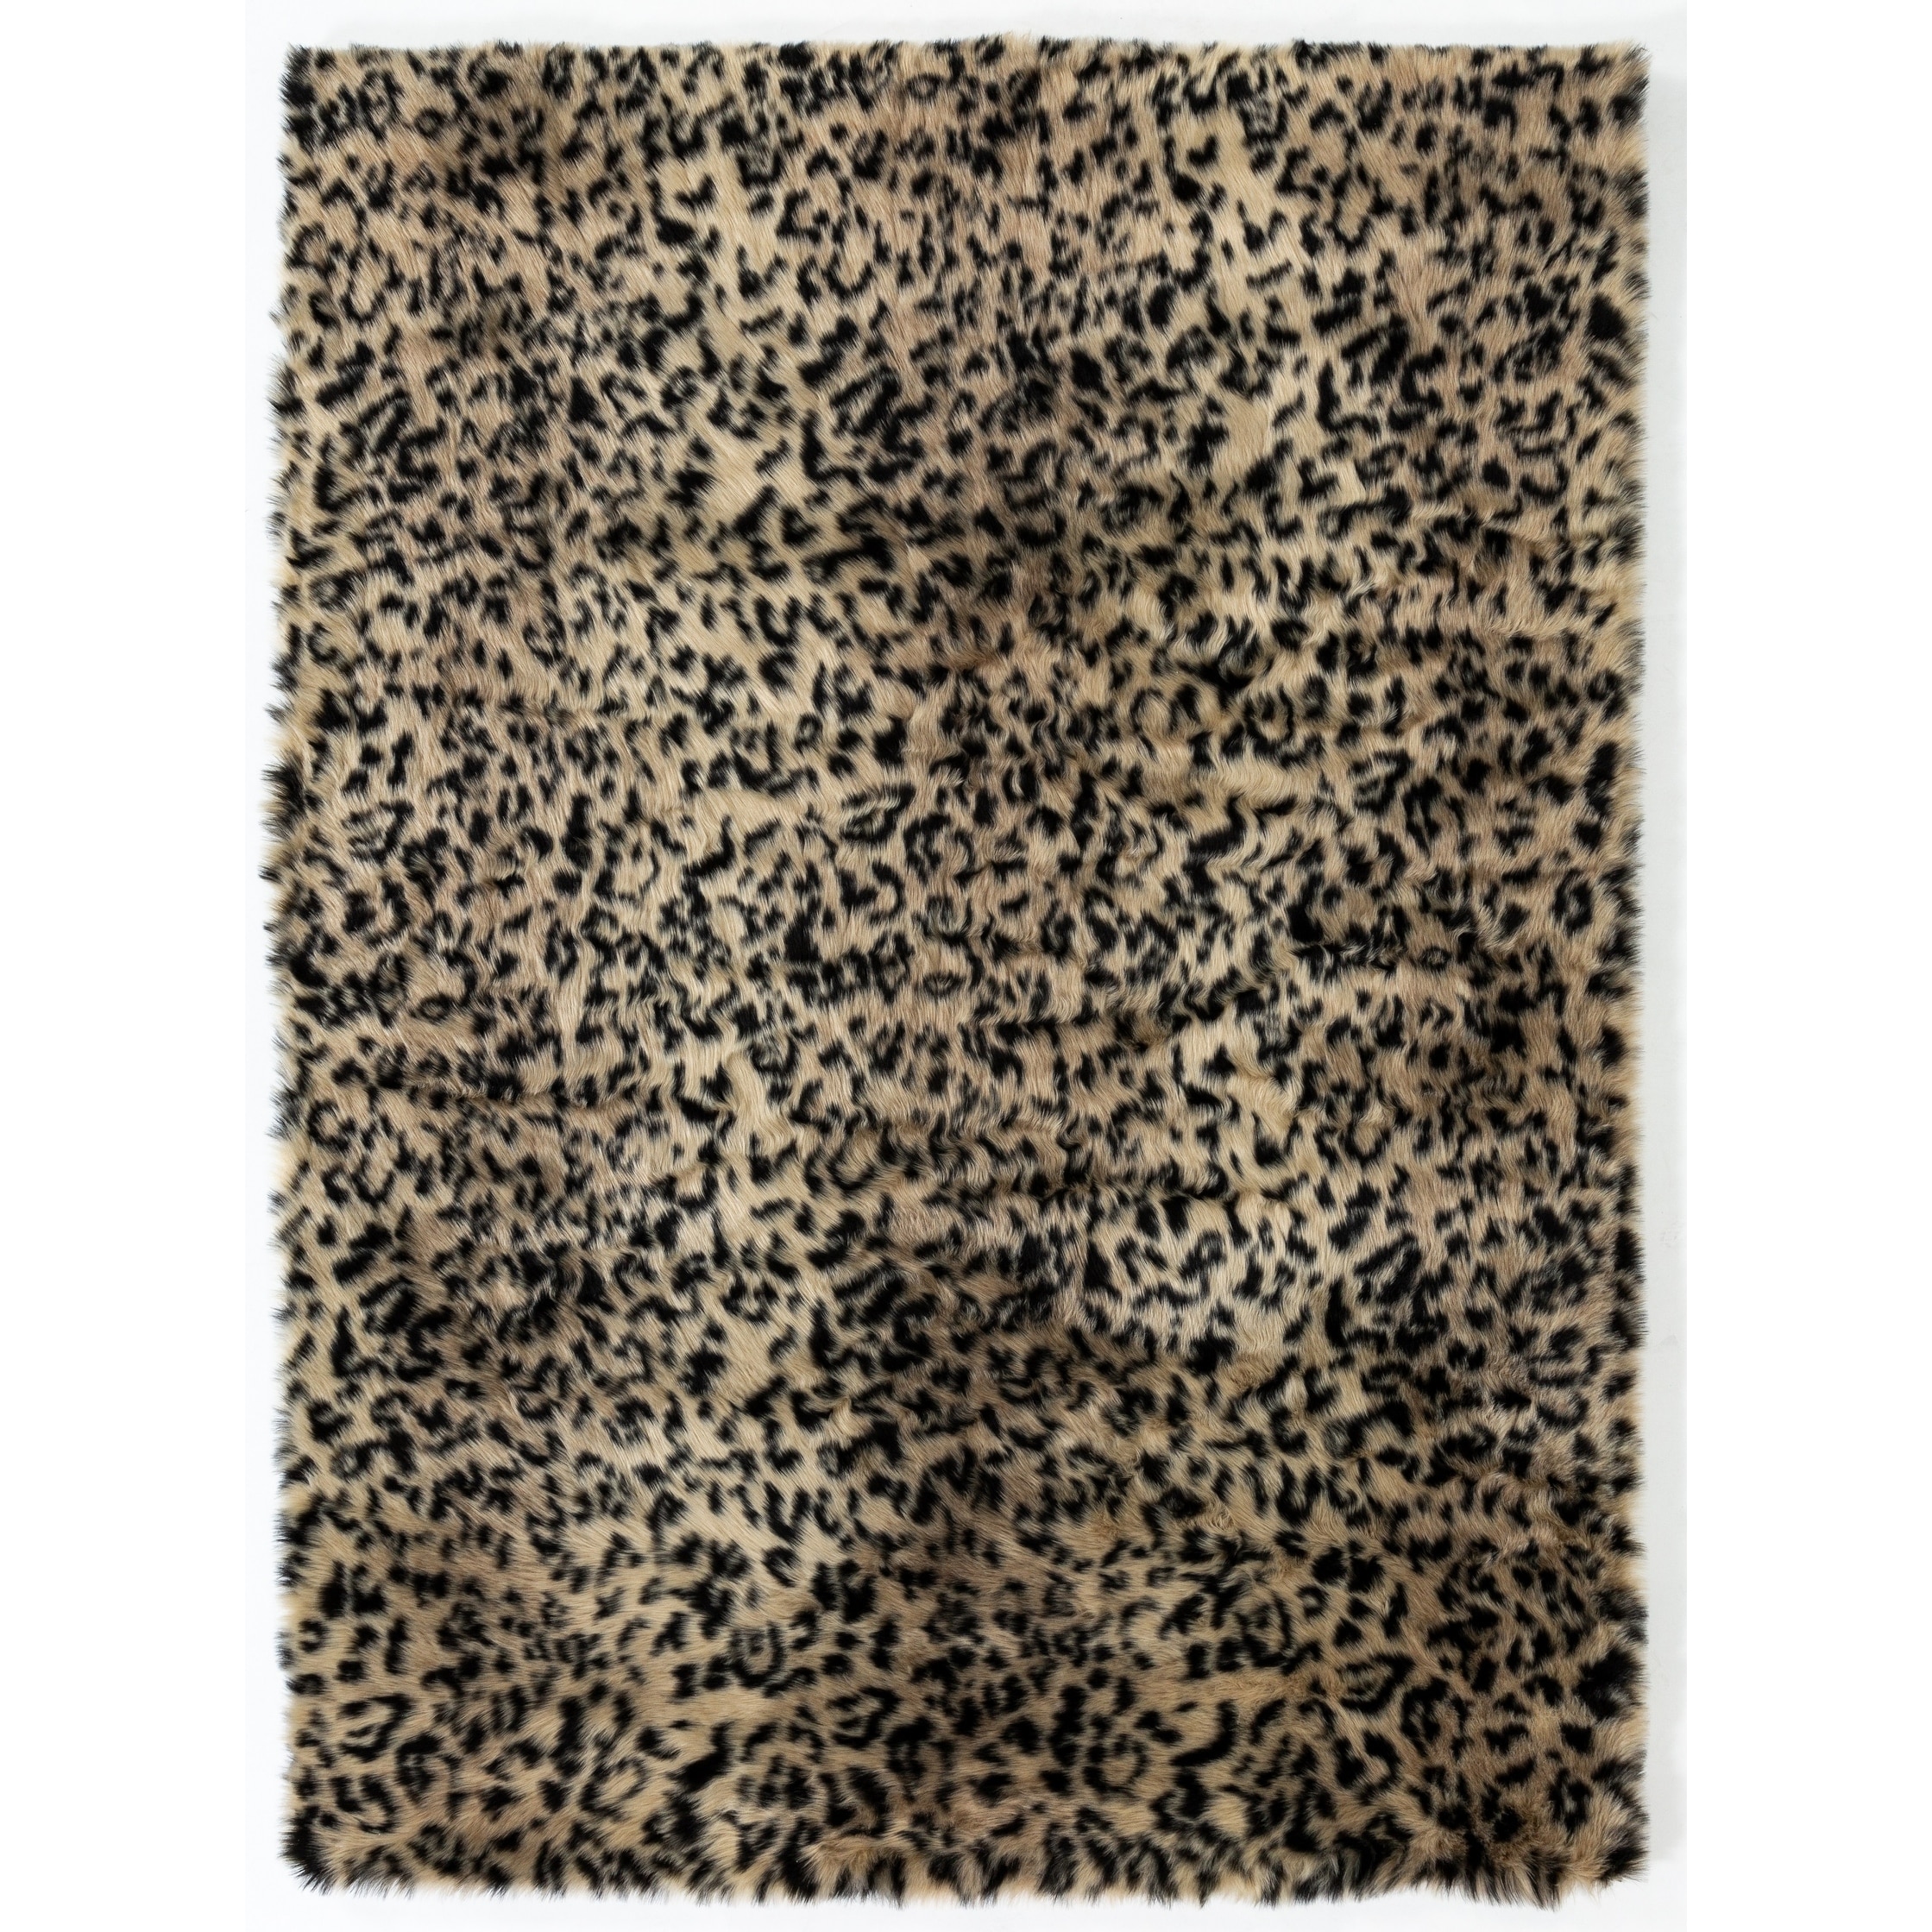 ALAZA Leopard and Tiger Print Abstract Area Rug Rugs for Living Room Bedroom 7' x 5' 